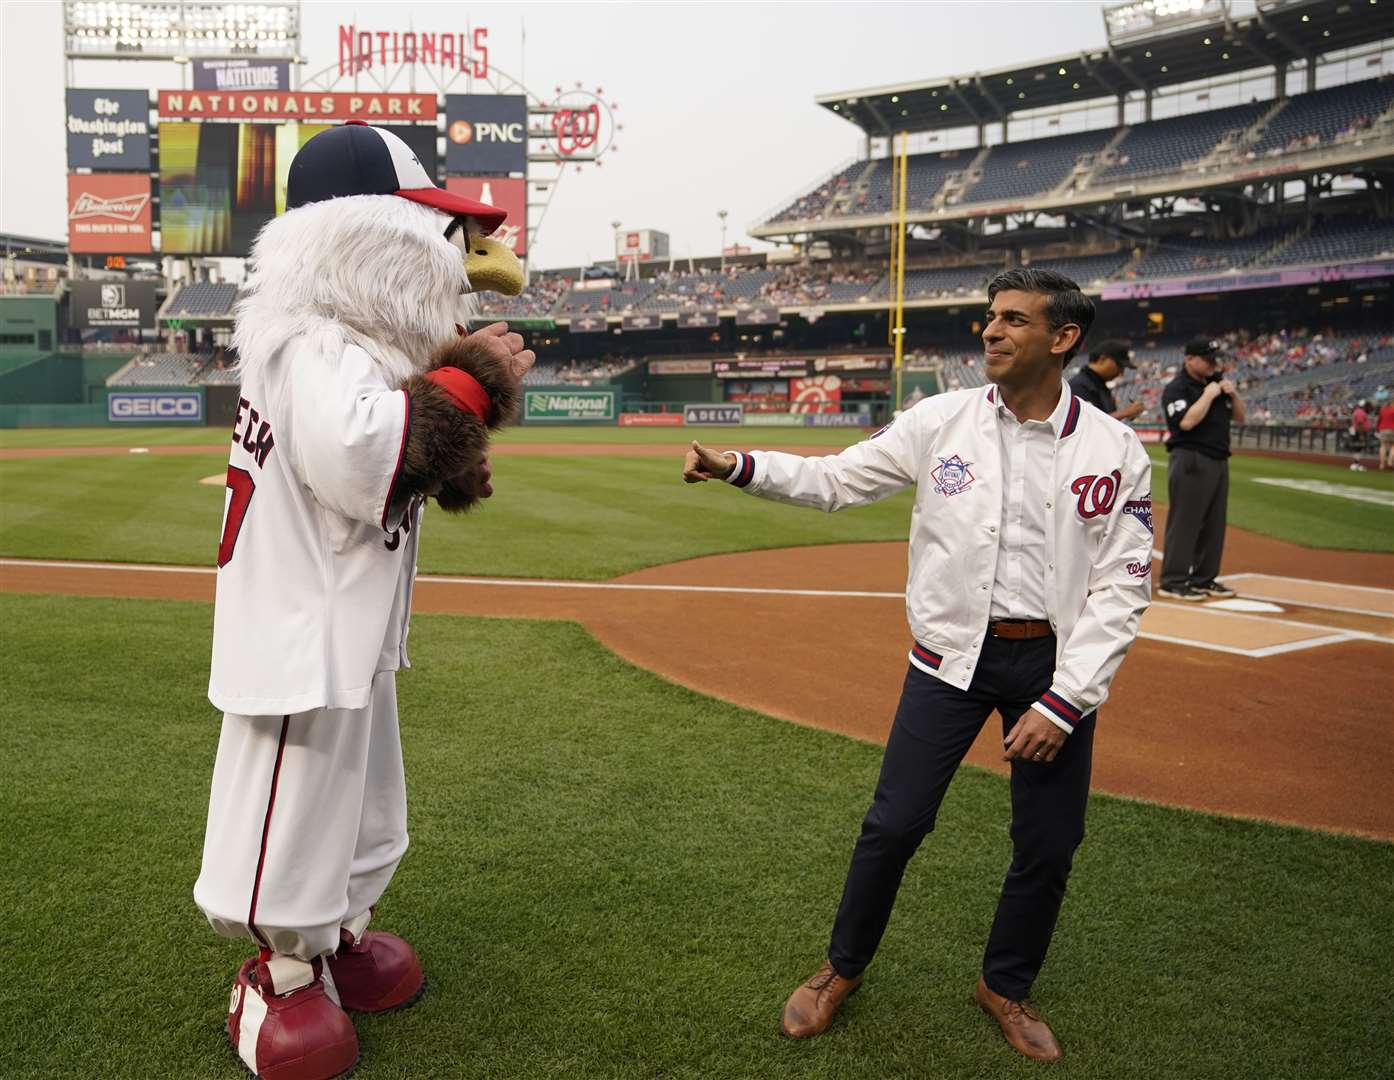 Prime Minister Rishi Sunak poses for pictures with Screech the Washington Nationals Mascot while attending the Washington Nationals v Arizona Diamondbacks baseball at Nationals Park during his visit to Washington DC in the US. (Niall Carson, PA)